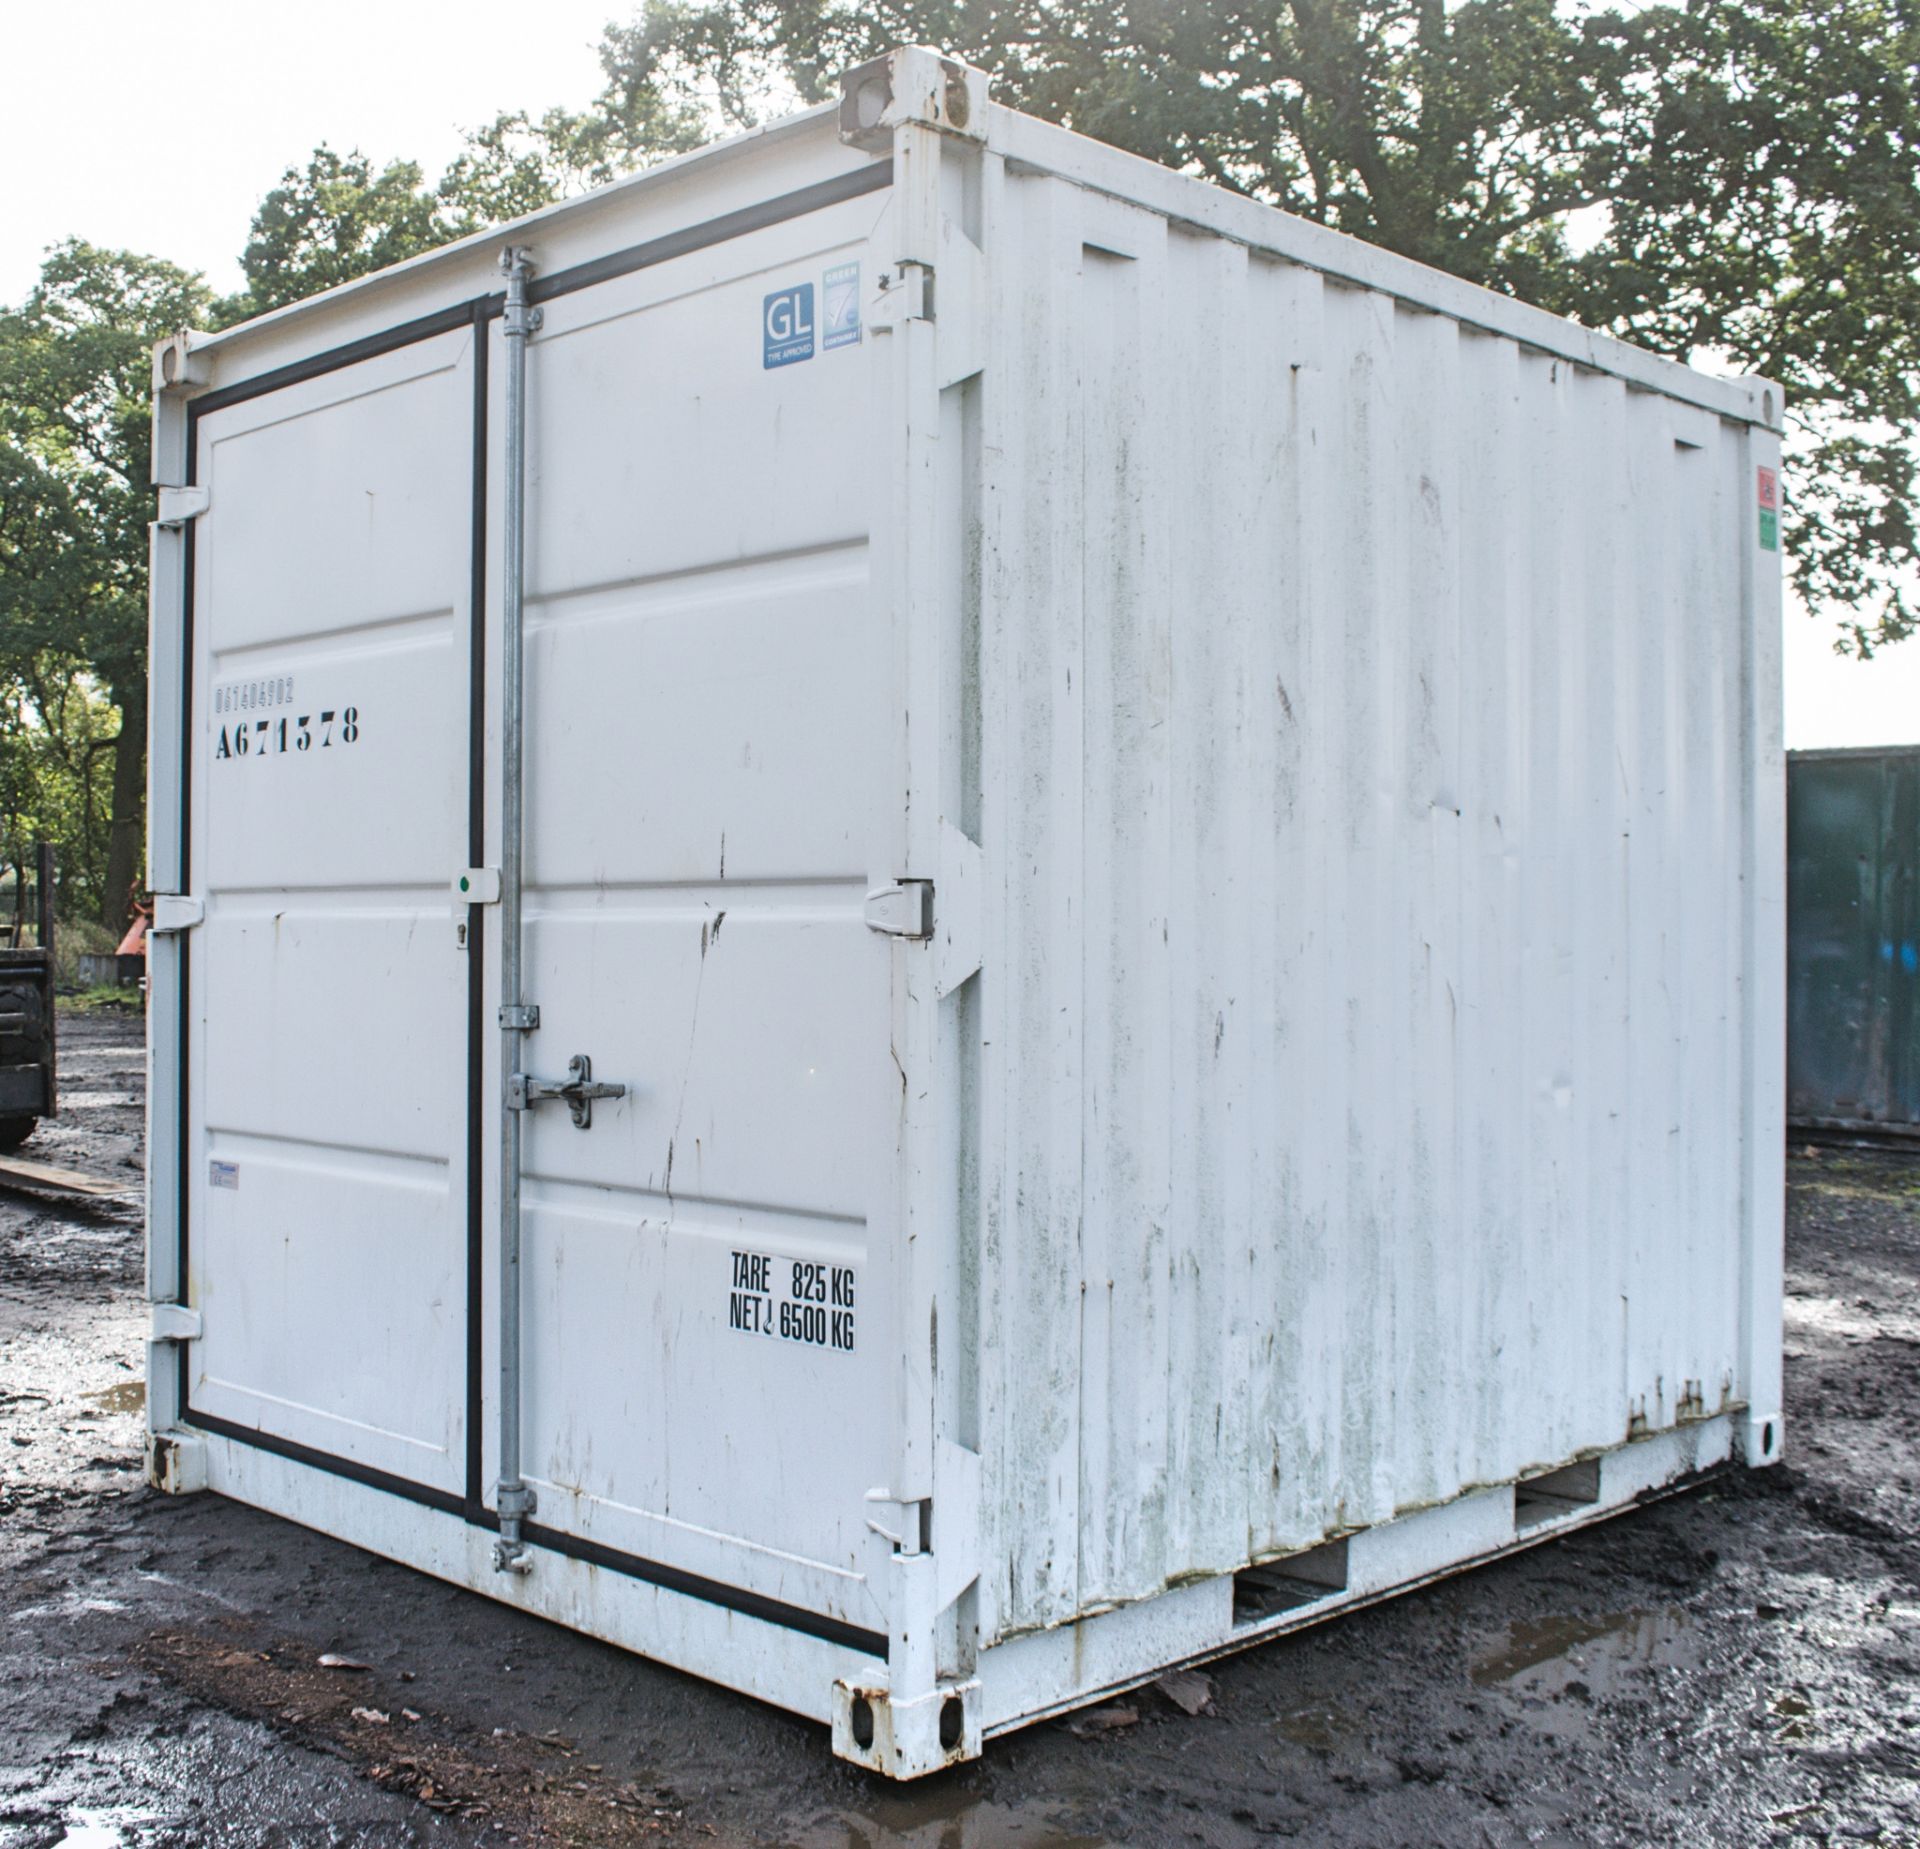 10' by 8' steel storage container A671378 - Image 2 of 7